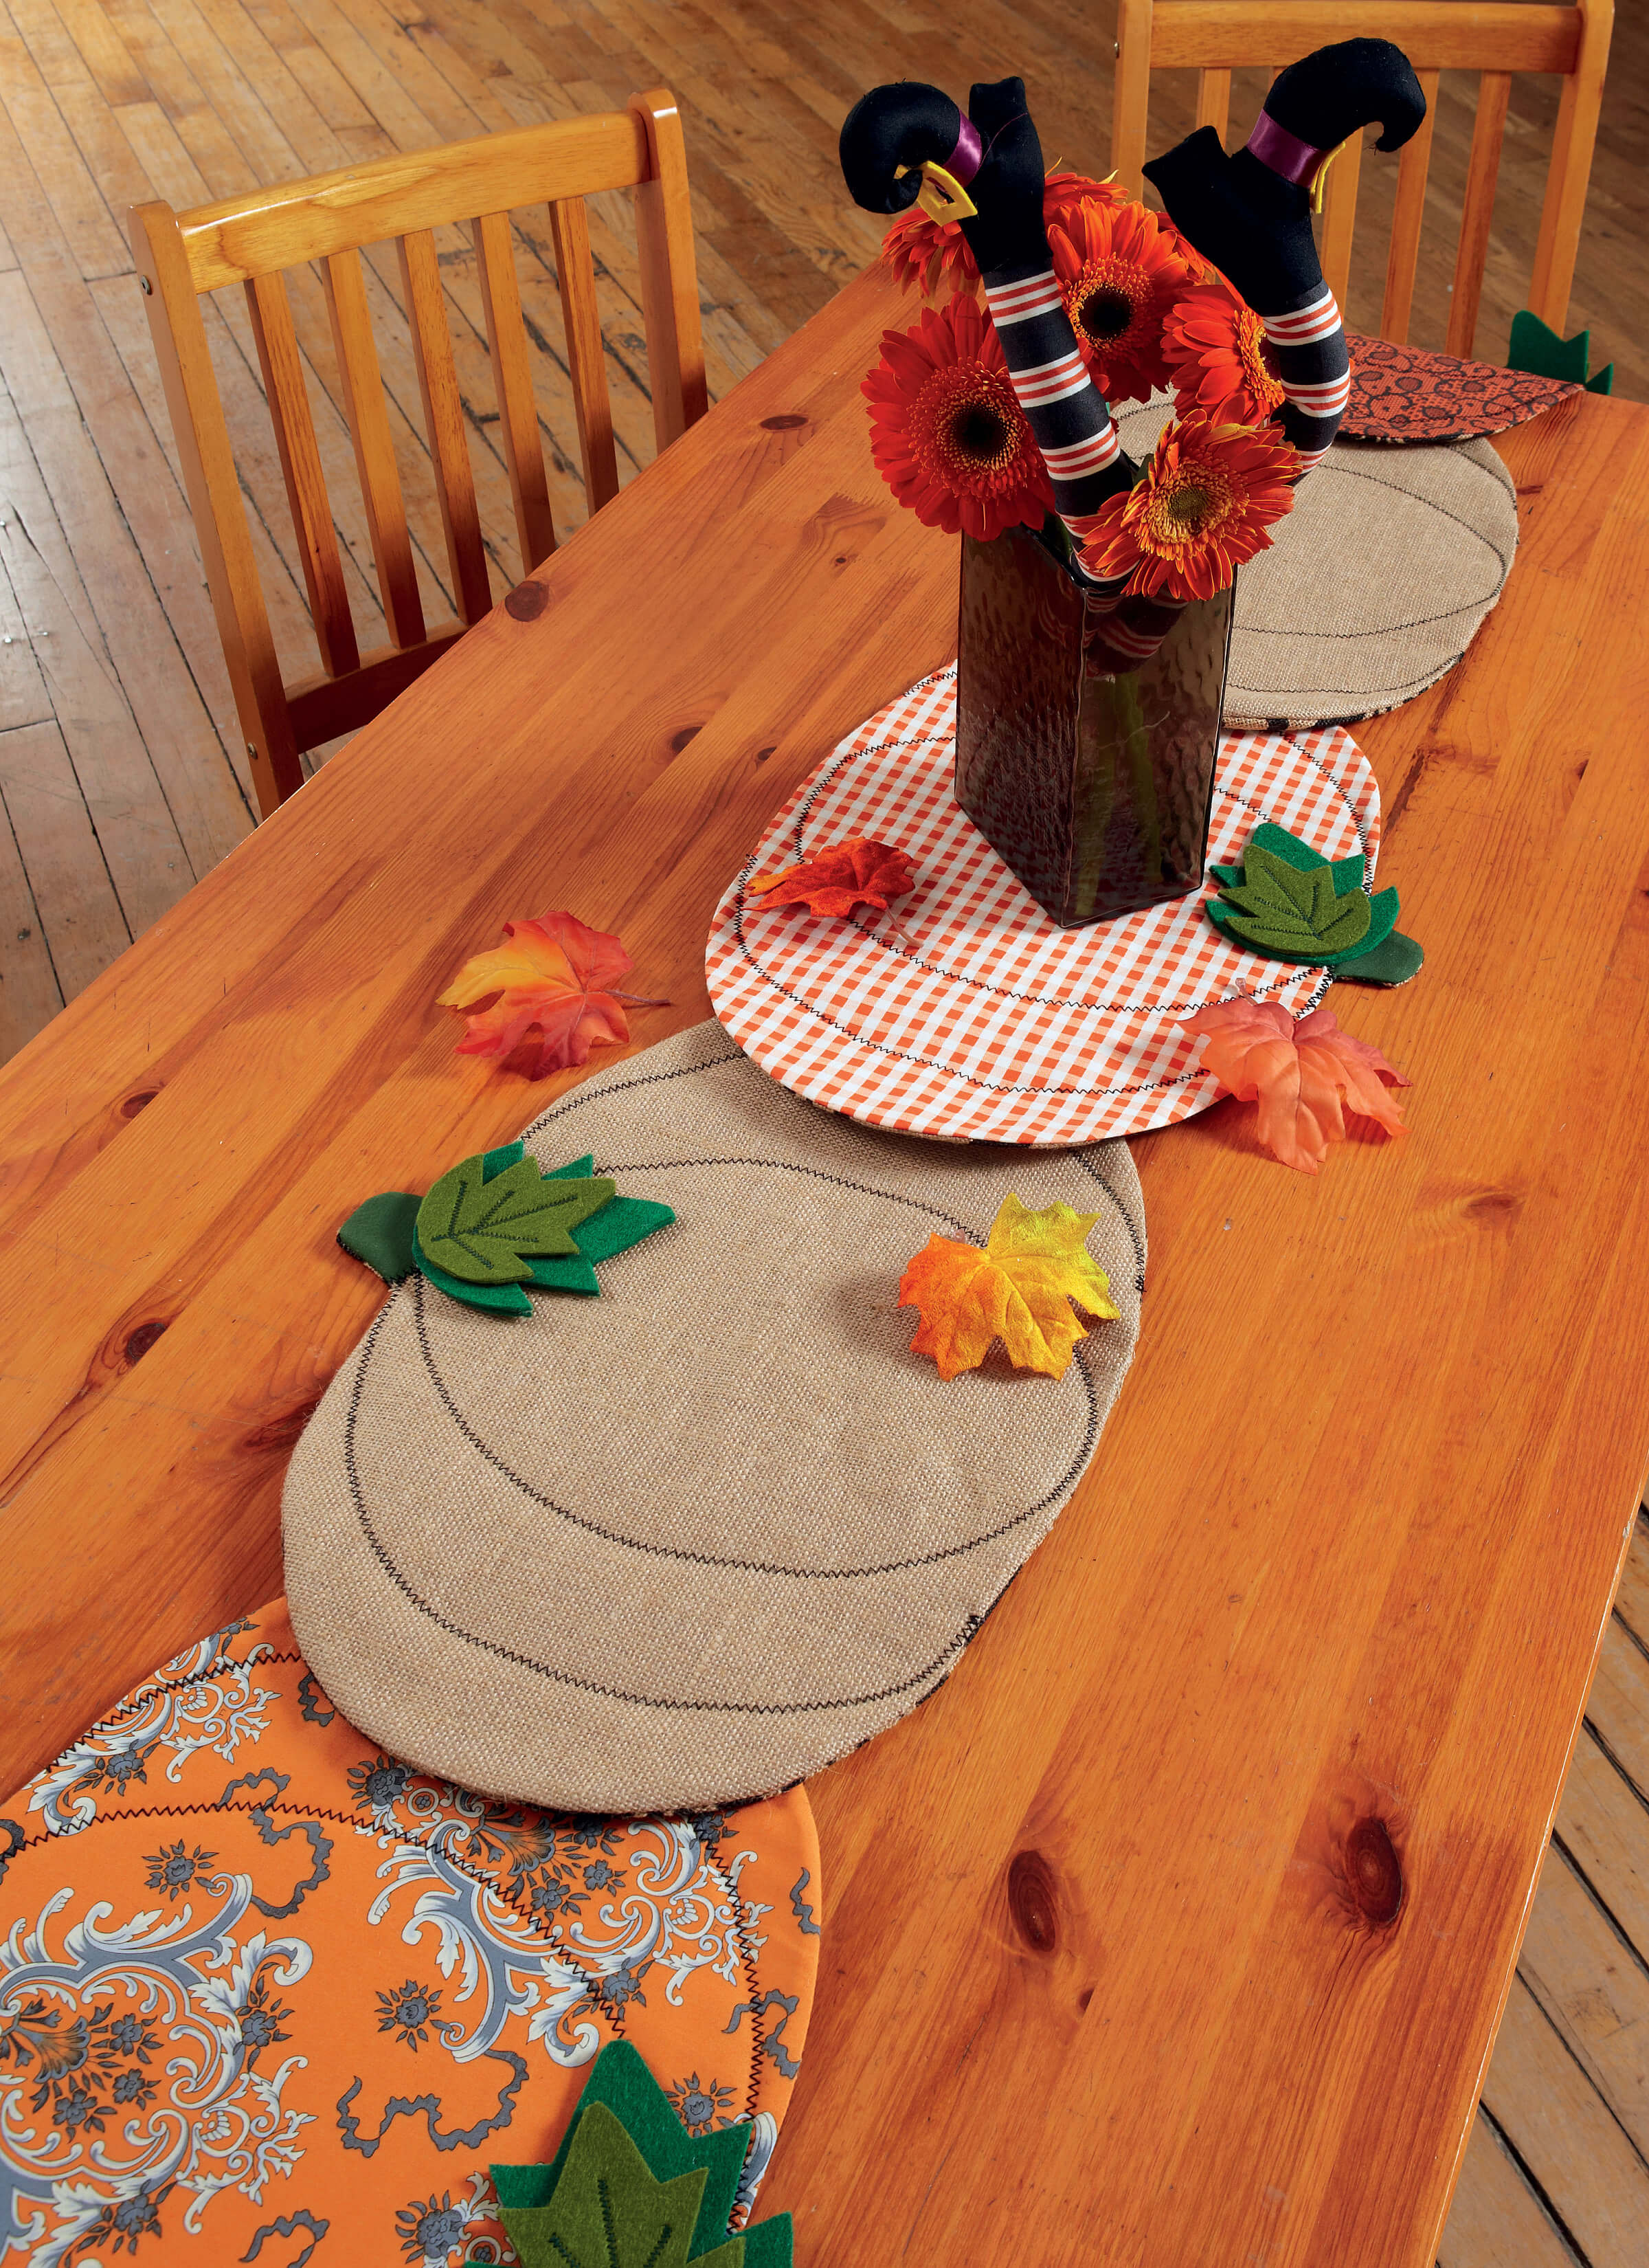 McCall's Sewing Pattern Pumpkin Placemats/Table Runner, Witch Hat/Legs, and Wreaths